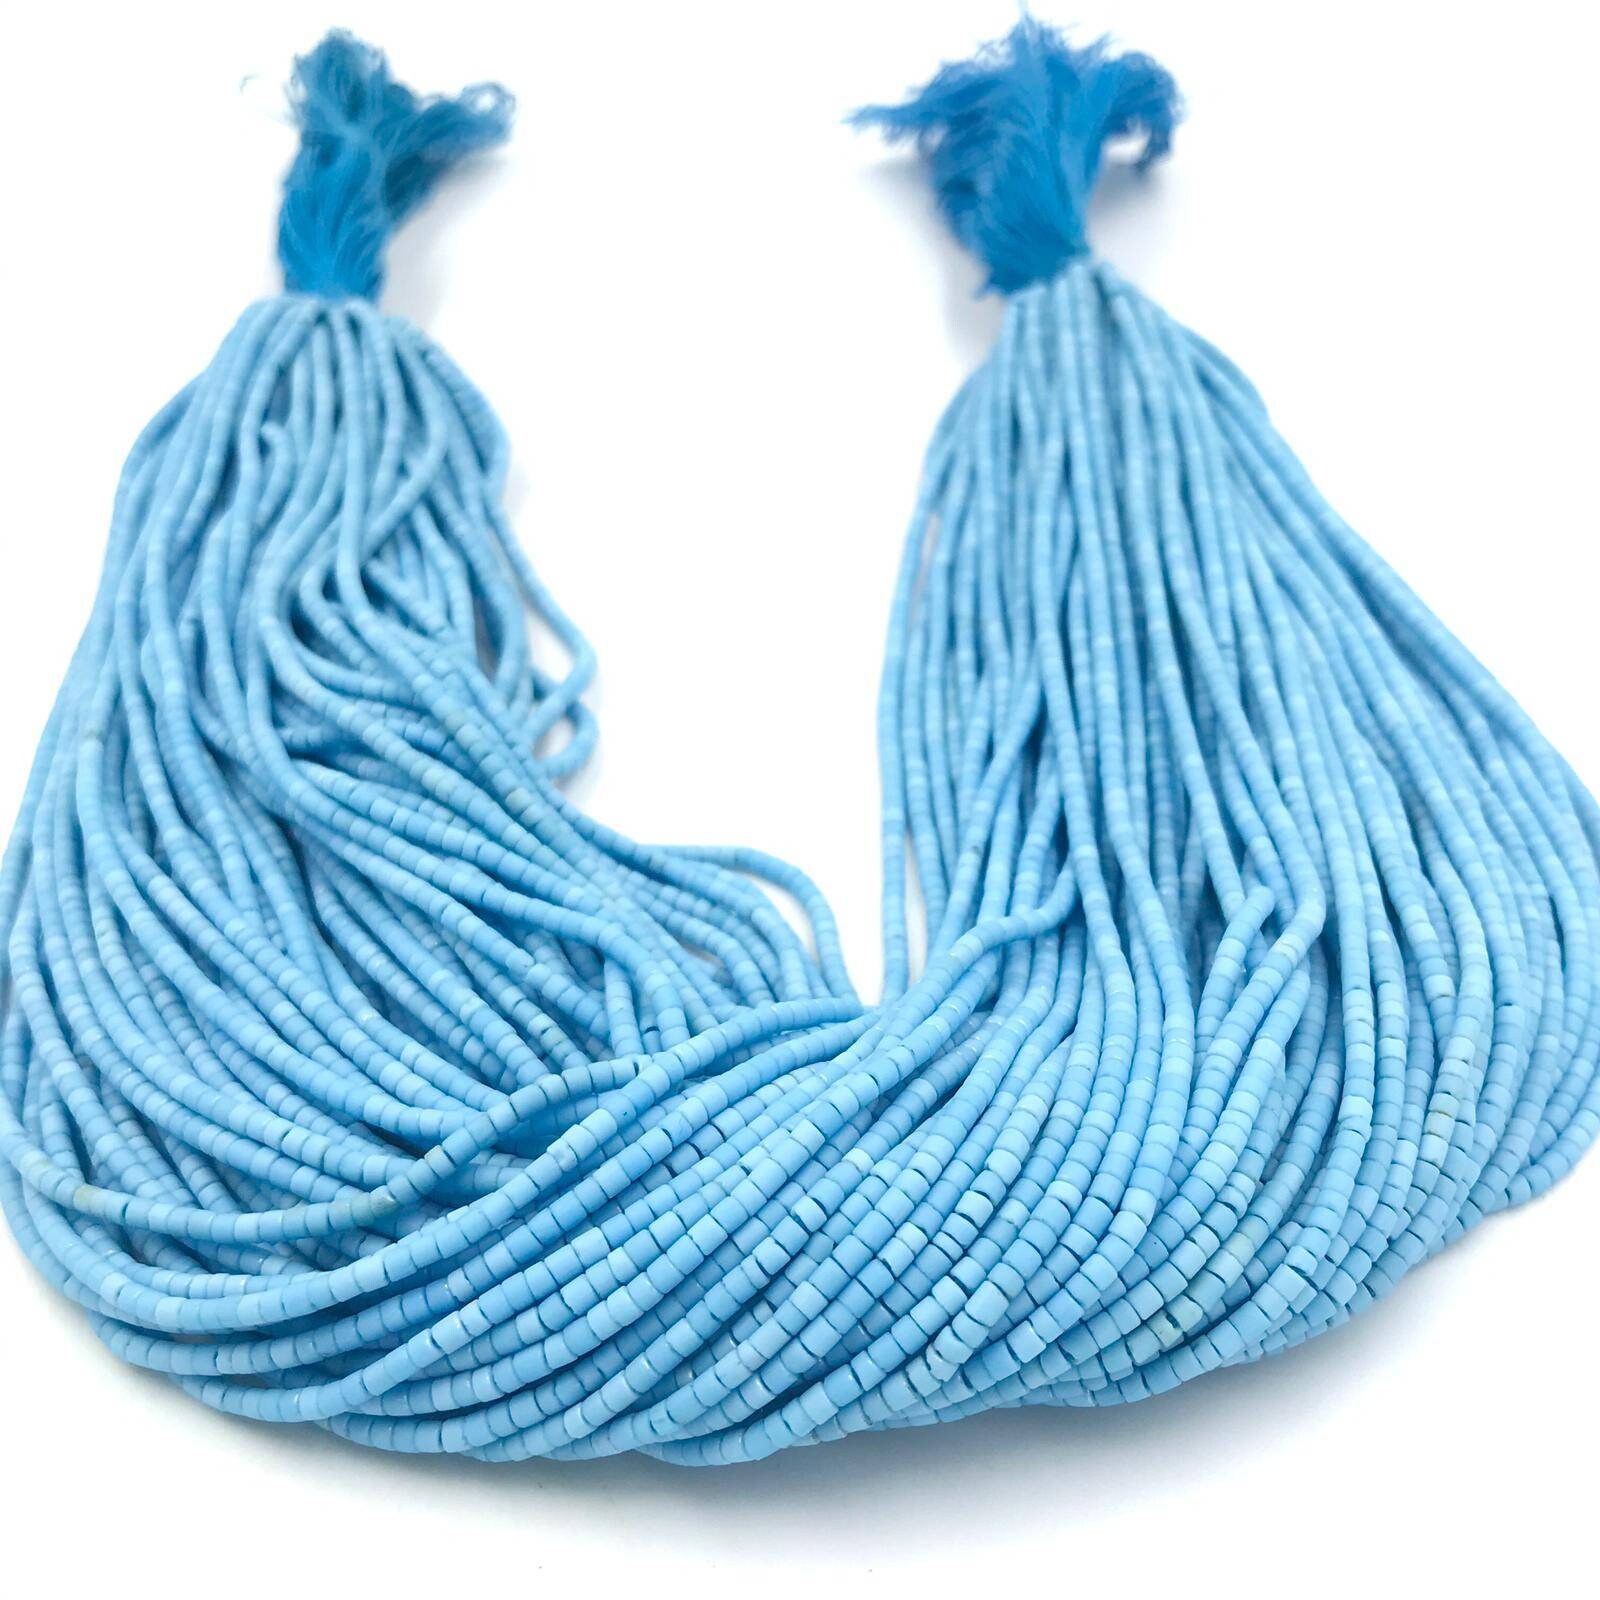 Shoe Strings Hoodie Laces - Blue Skies and Falling Leaves Replacement Cotton Hoodie Drawstring Lace